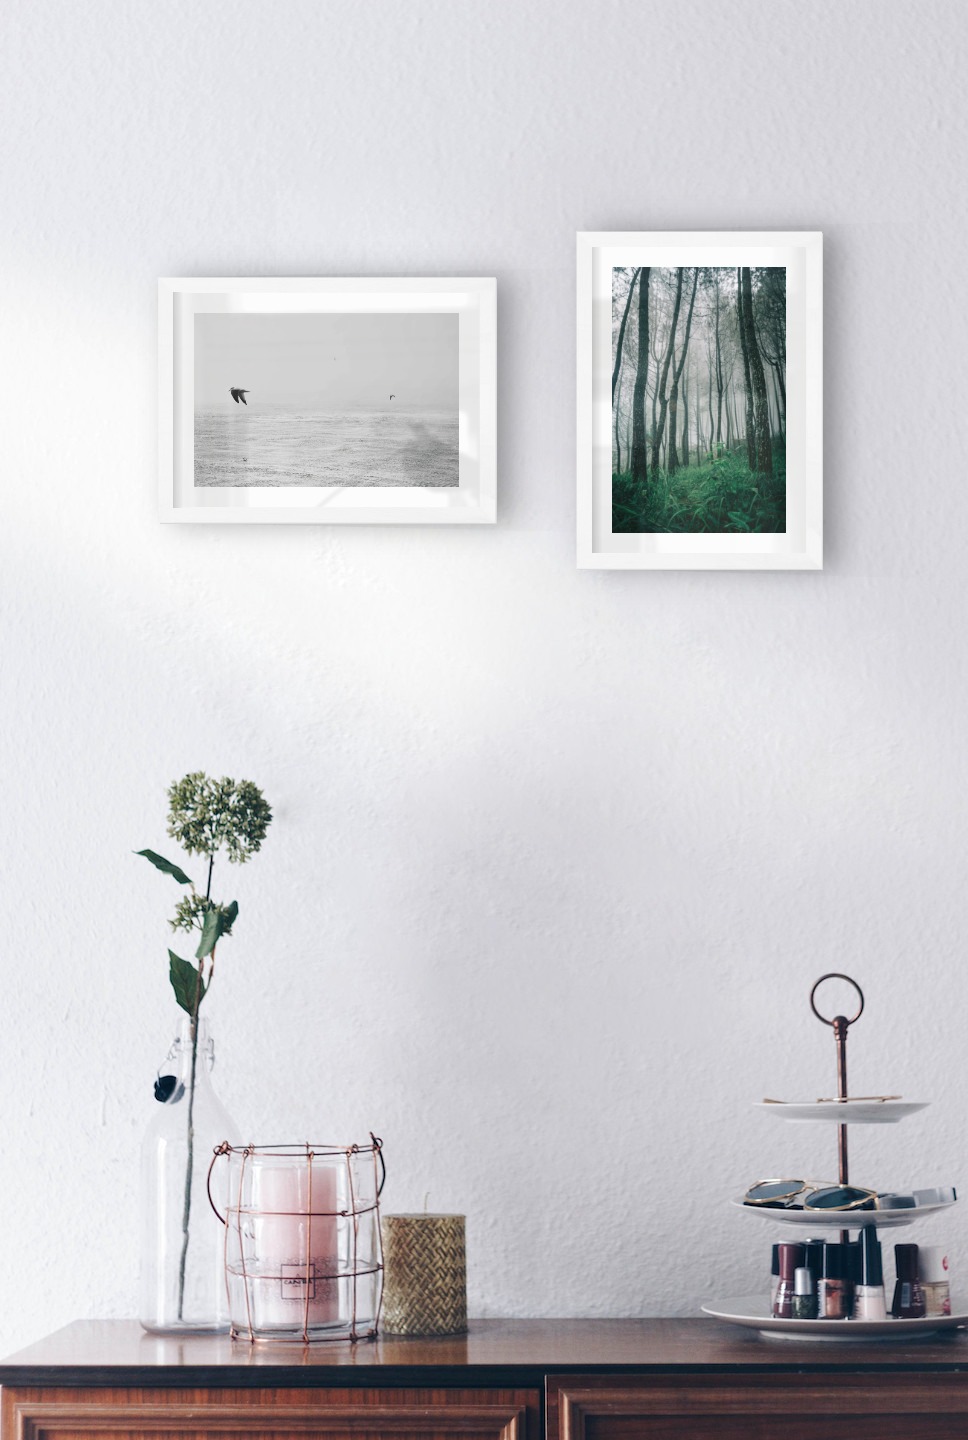 Gallery wall with picture frames in white in sizes 21x30 with prints "Birds over the sea" and "Tall trees"